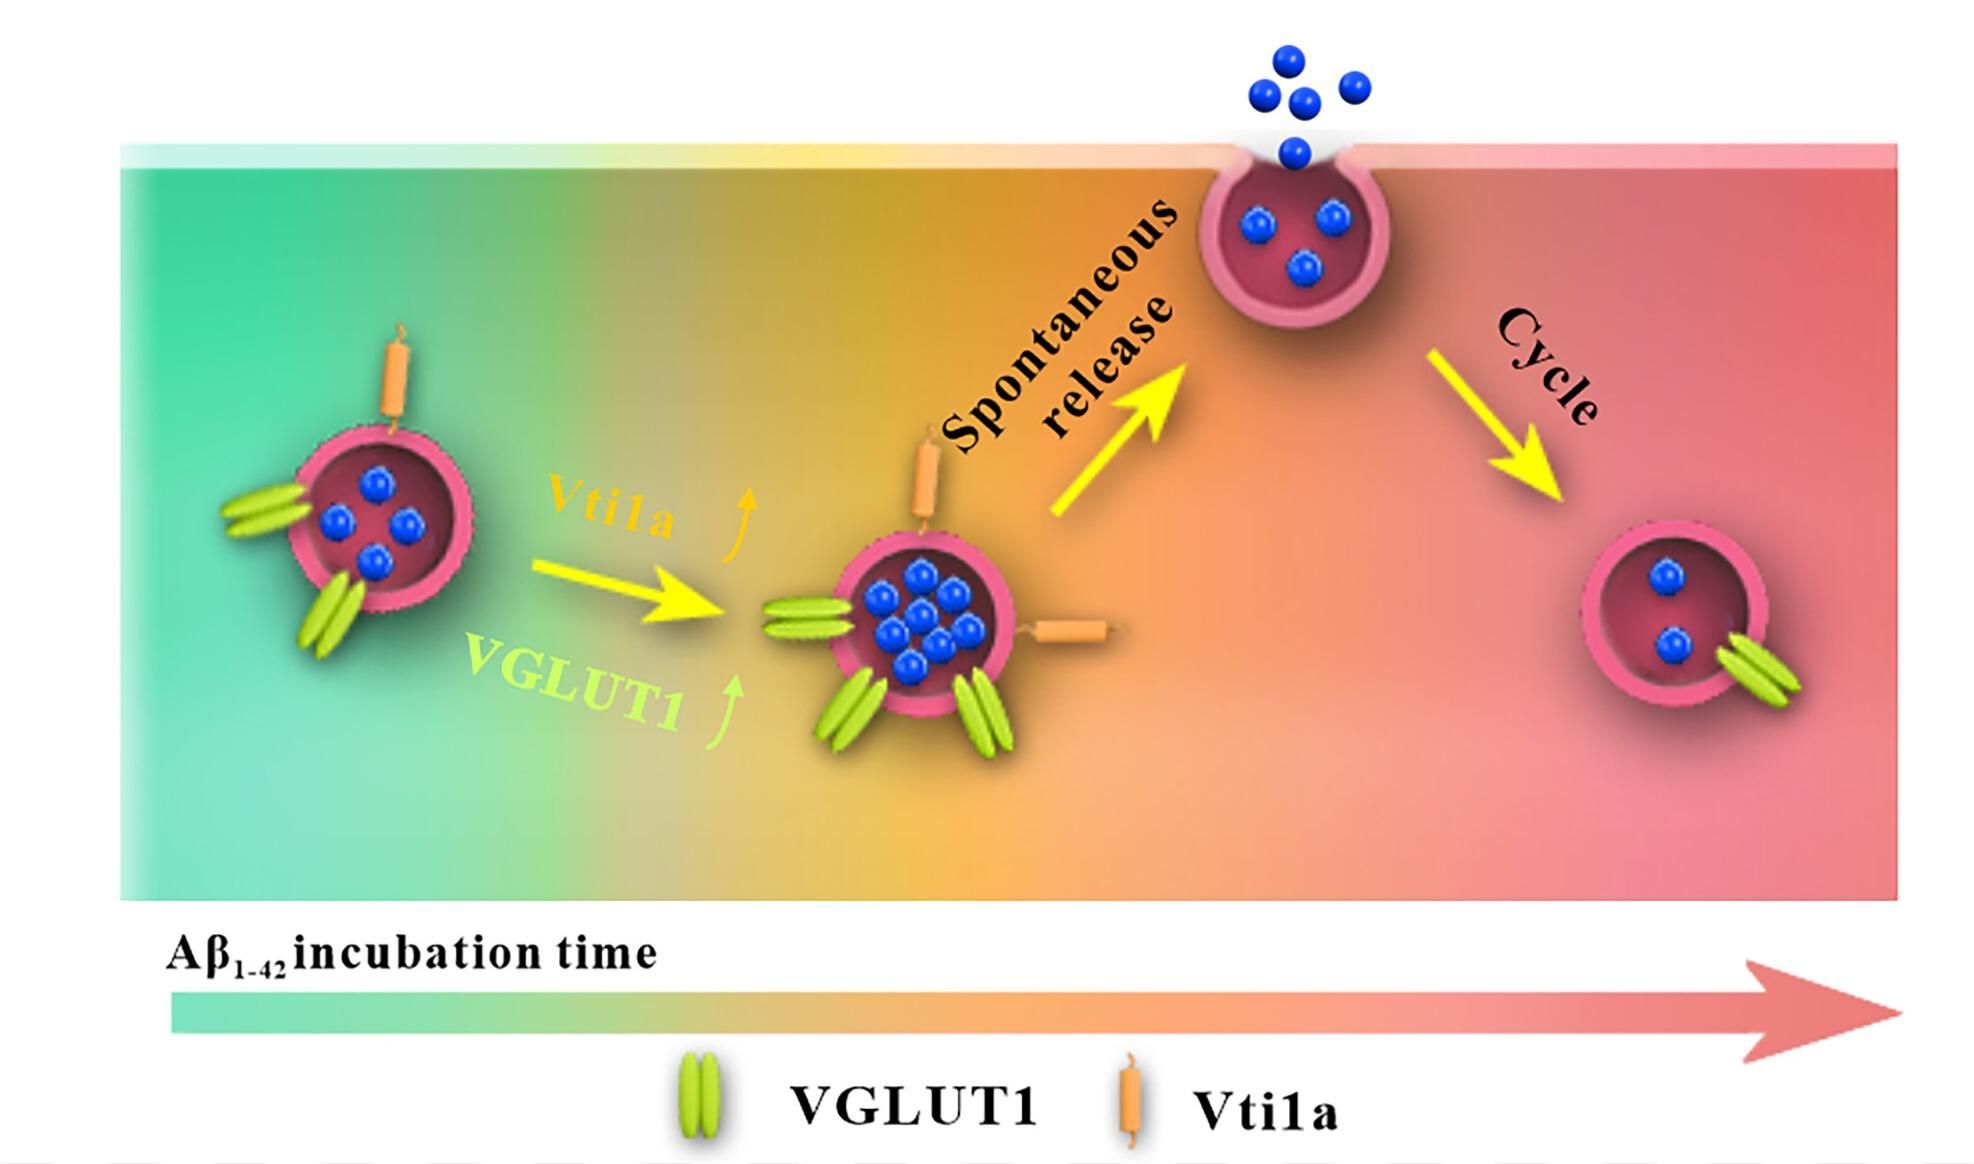 <a href='https://huanglab.whu.edu.cn/info/1008/2657.htm' target='_blank'><h4>Nanoelectrochemistry reveals how soluble Aβ42 oligomers  alter vesicular storage and release of glutamate</h4> <p>Abstract: Glutamate (Glu) is the major excitatory transmitter in the nervous system. Impairment of its vesicular release by β-amyloid (Aβ) oligomers is thought to participate in pathological processes leading to Alzheimer’s disease. However, it remains unclear whether soluble Aβ42 oligomers affect intravesicular amounts of Glu or their release in the brain, or both. Measurements made in this work ...</p></a>